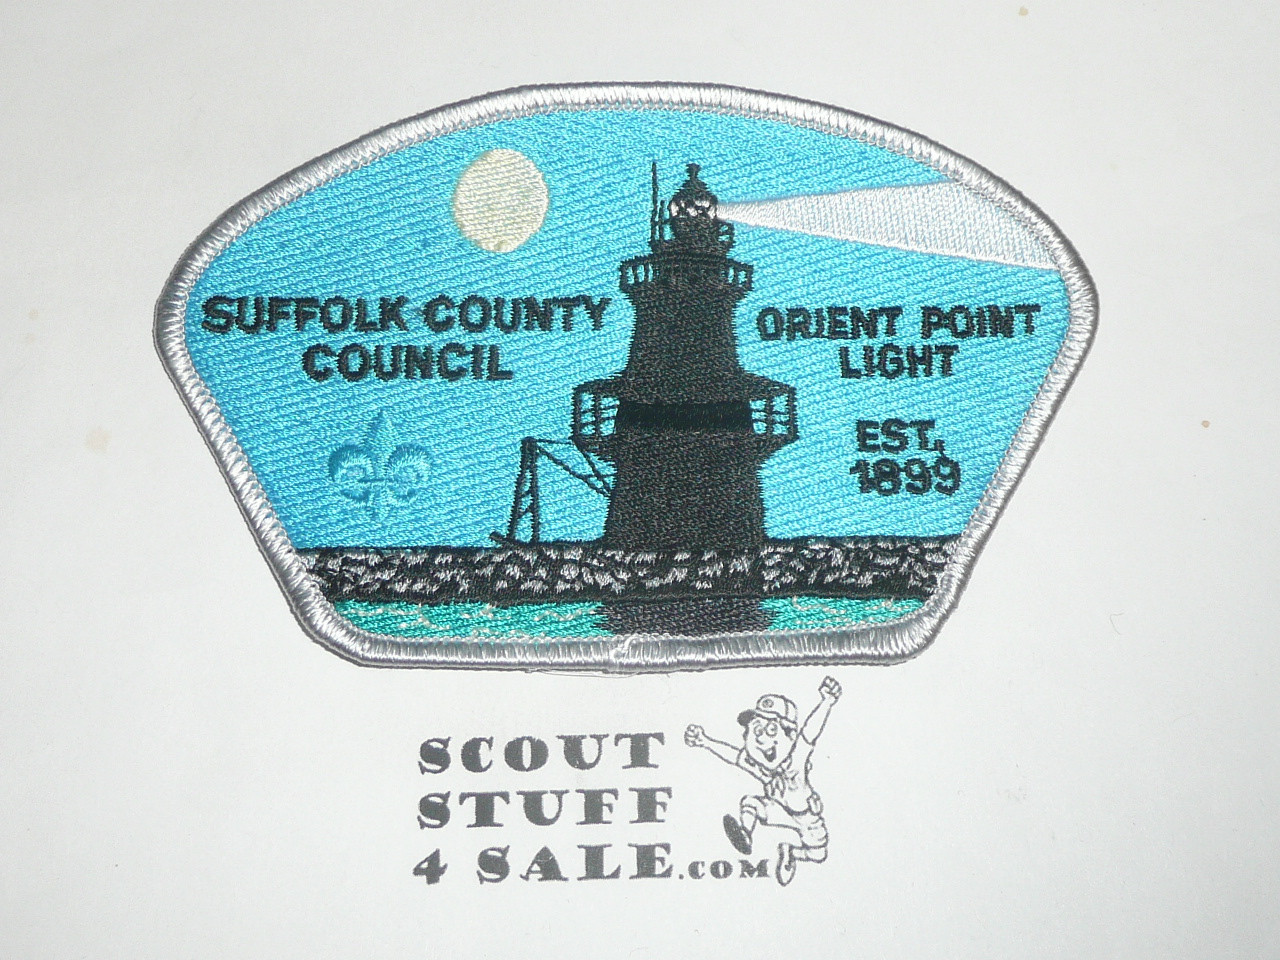 Suffolk County Council sa22 CSP, Orient Point Lighthouse - Scout